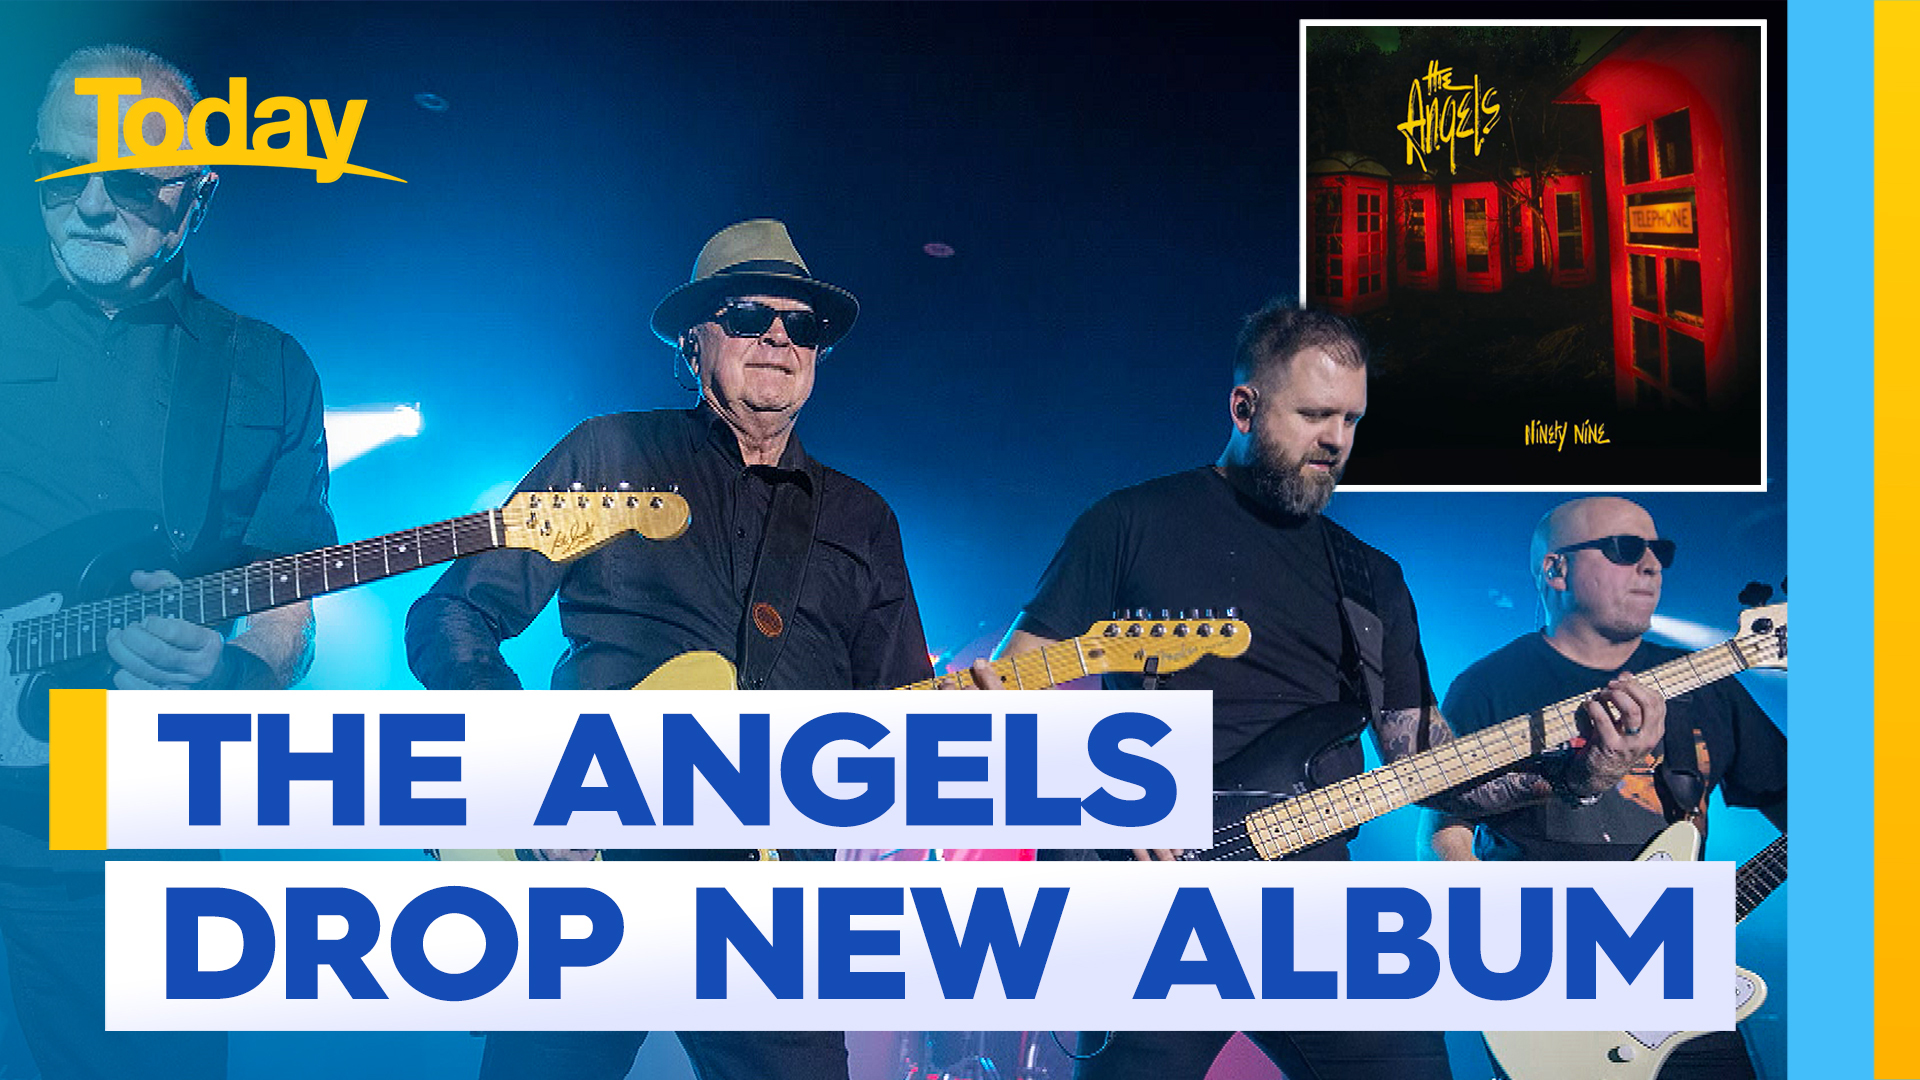 The Angels launch new album and Australian tour